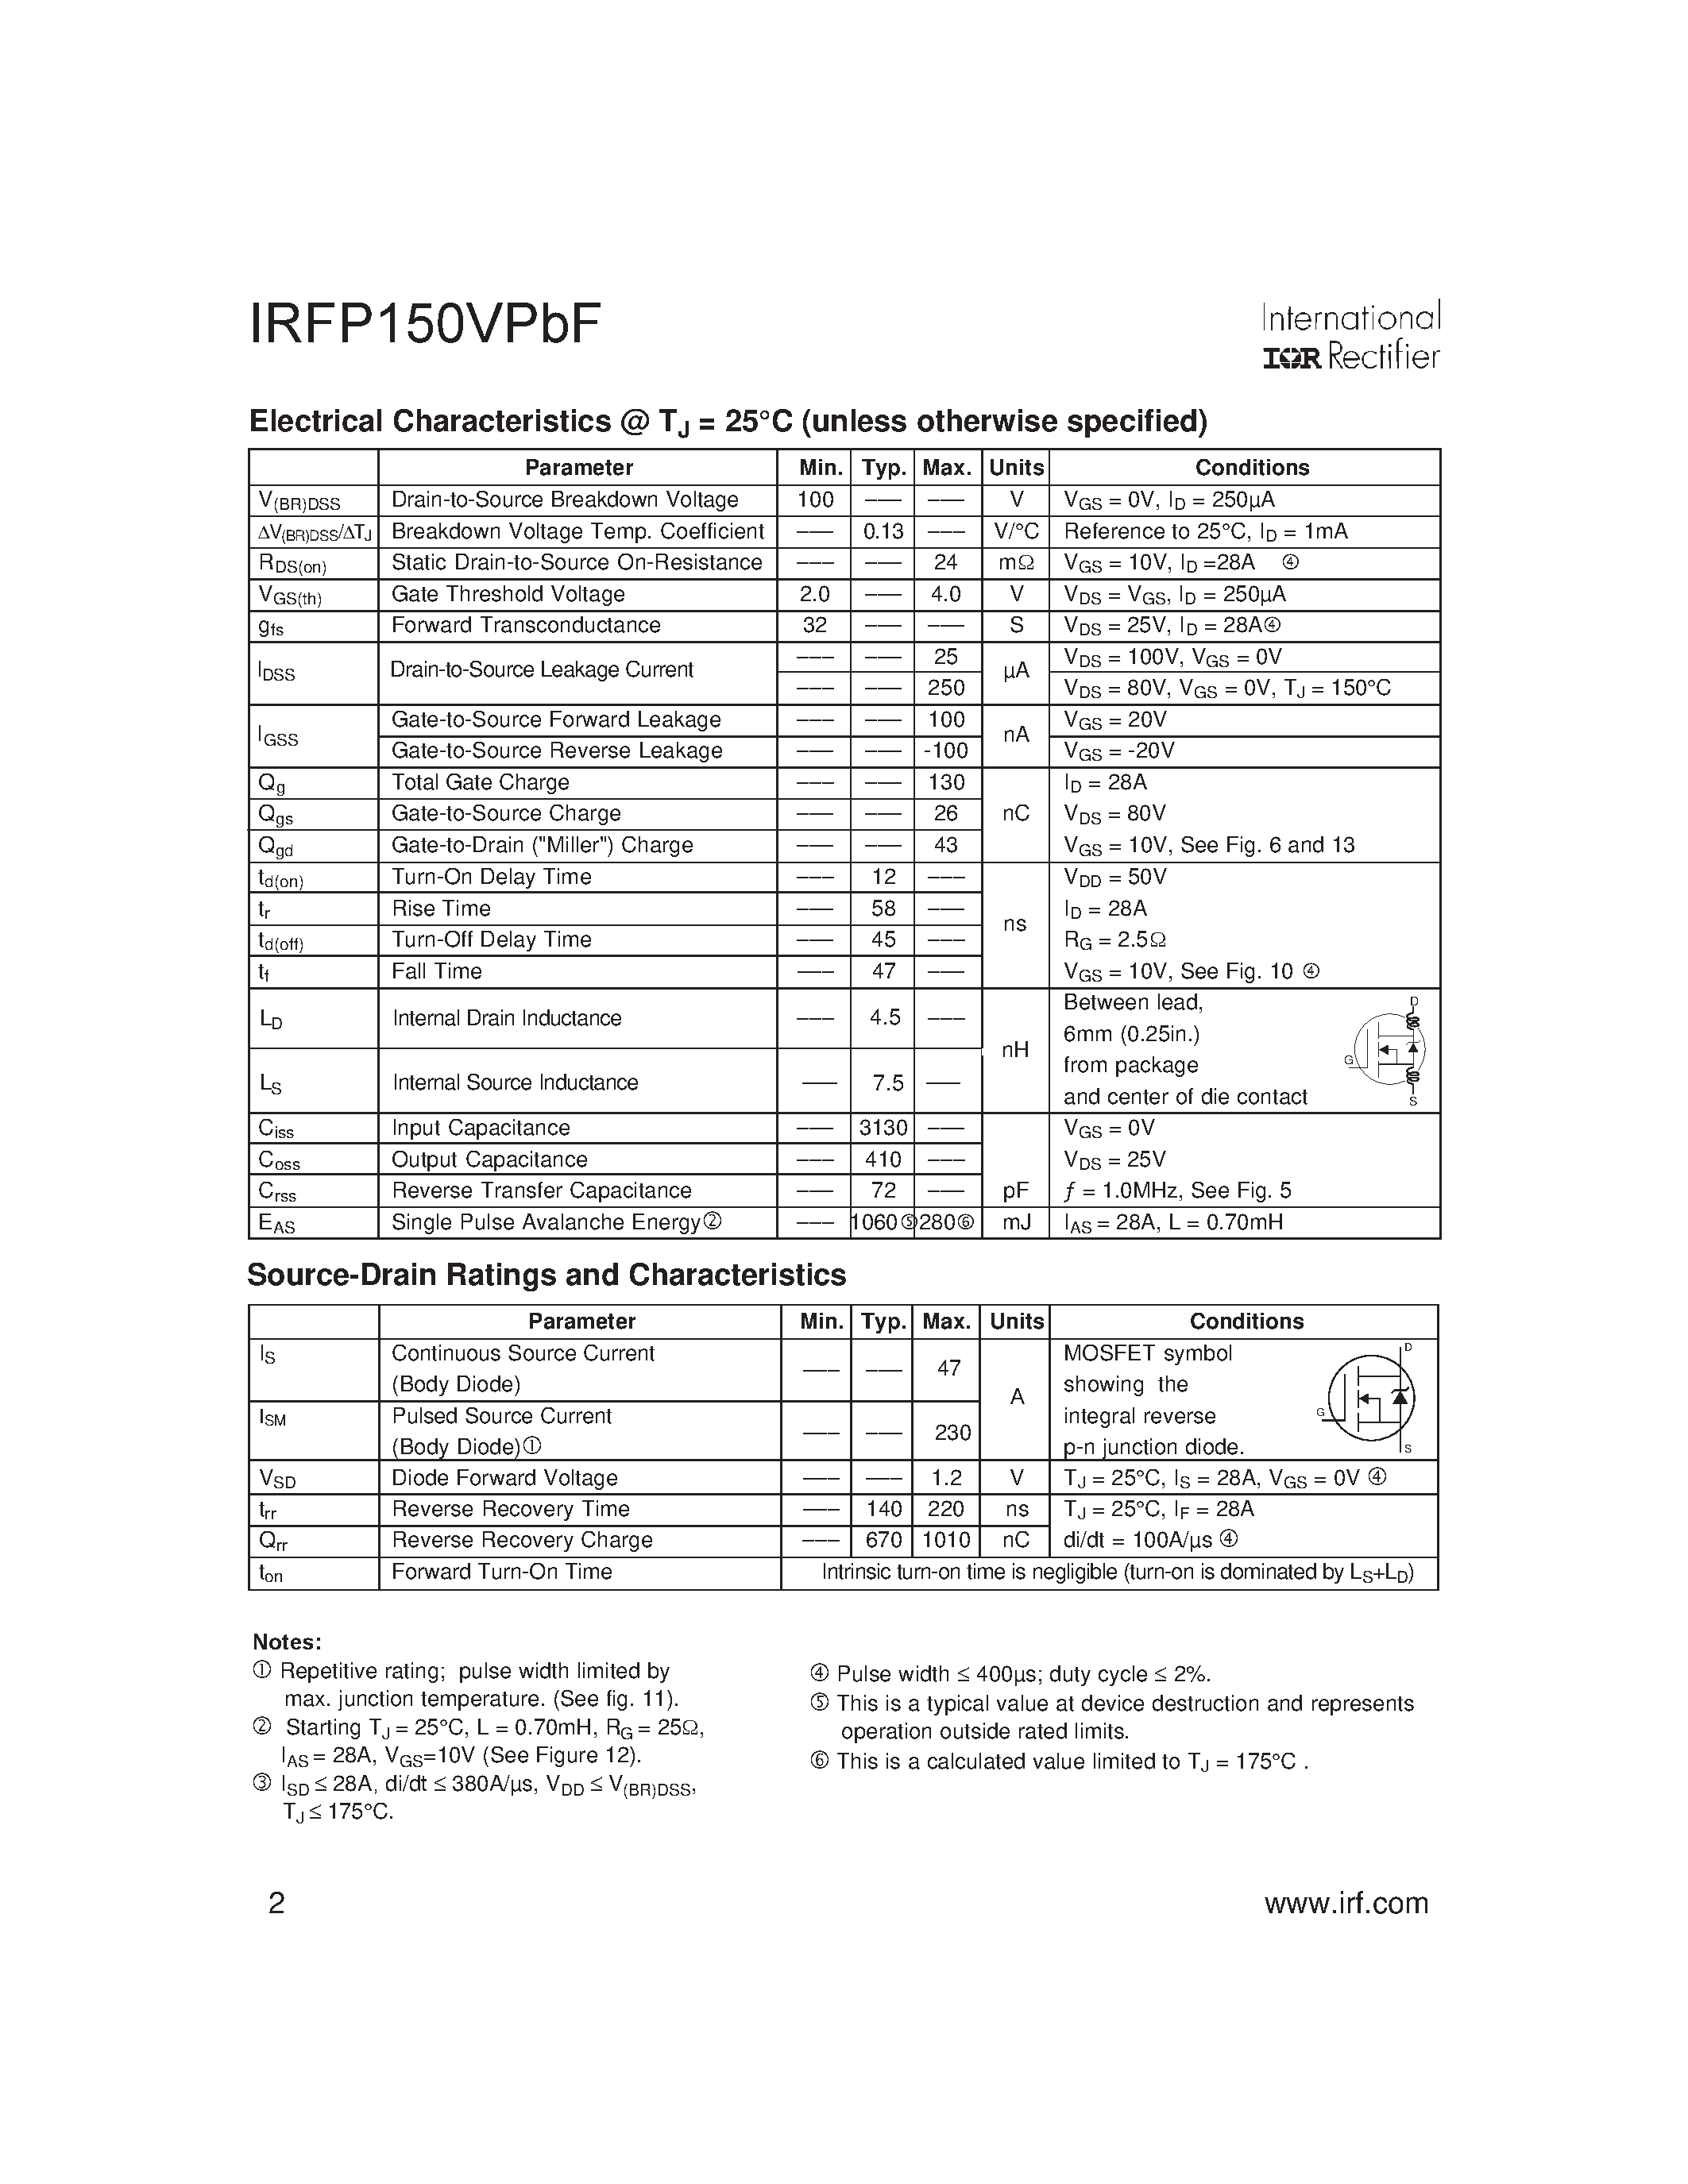 Datasheet IRFP150VPBF - Power MOSFET page 2